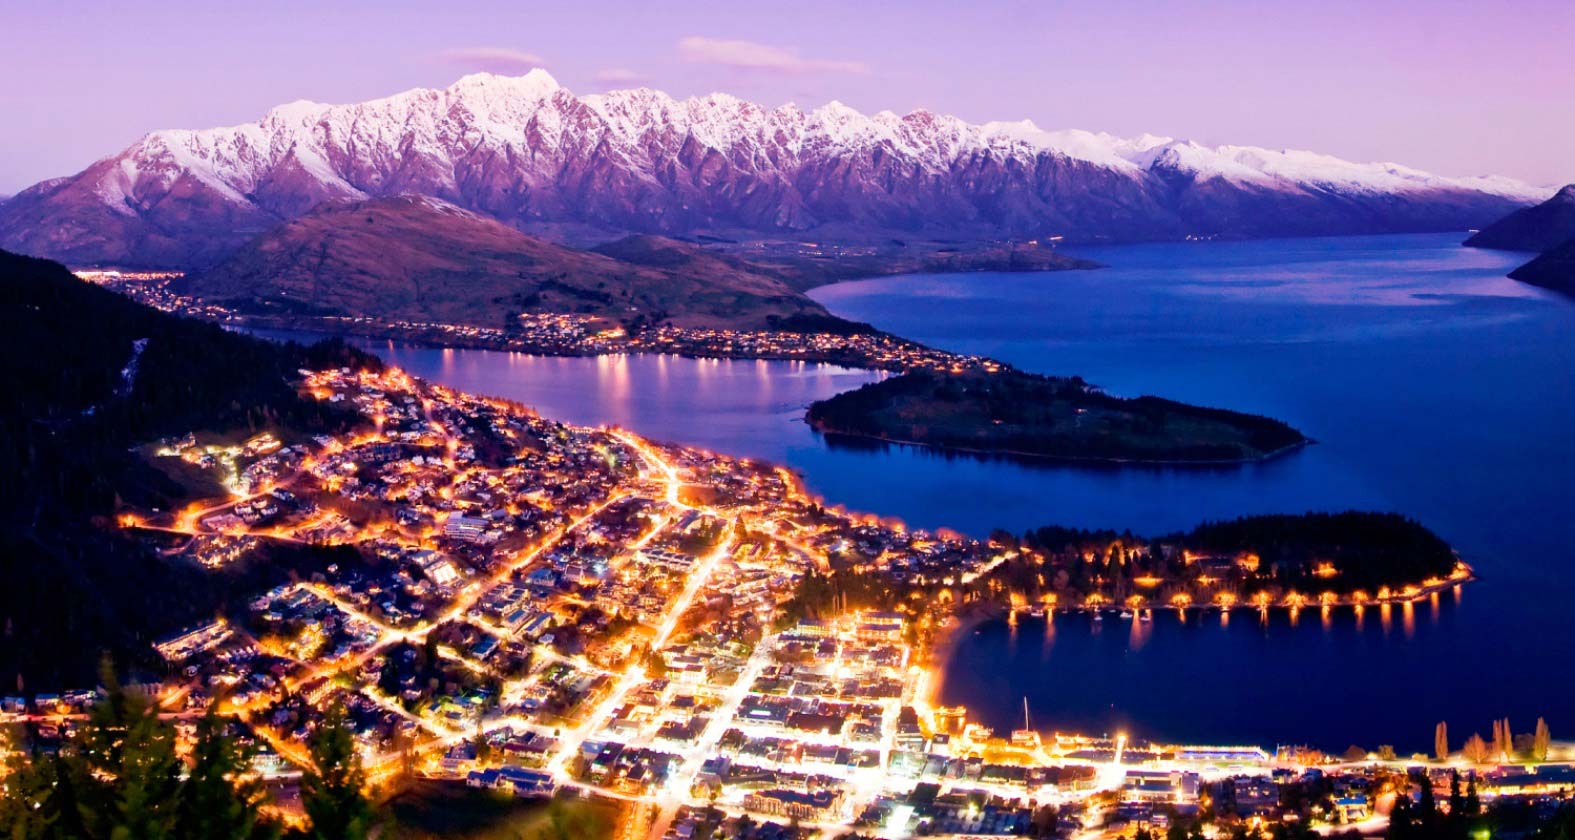 10 popular places to visit in New Zealand